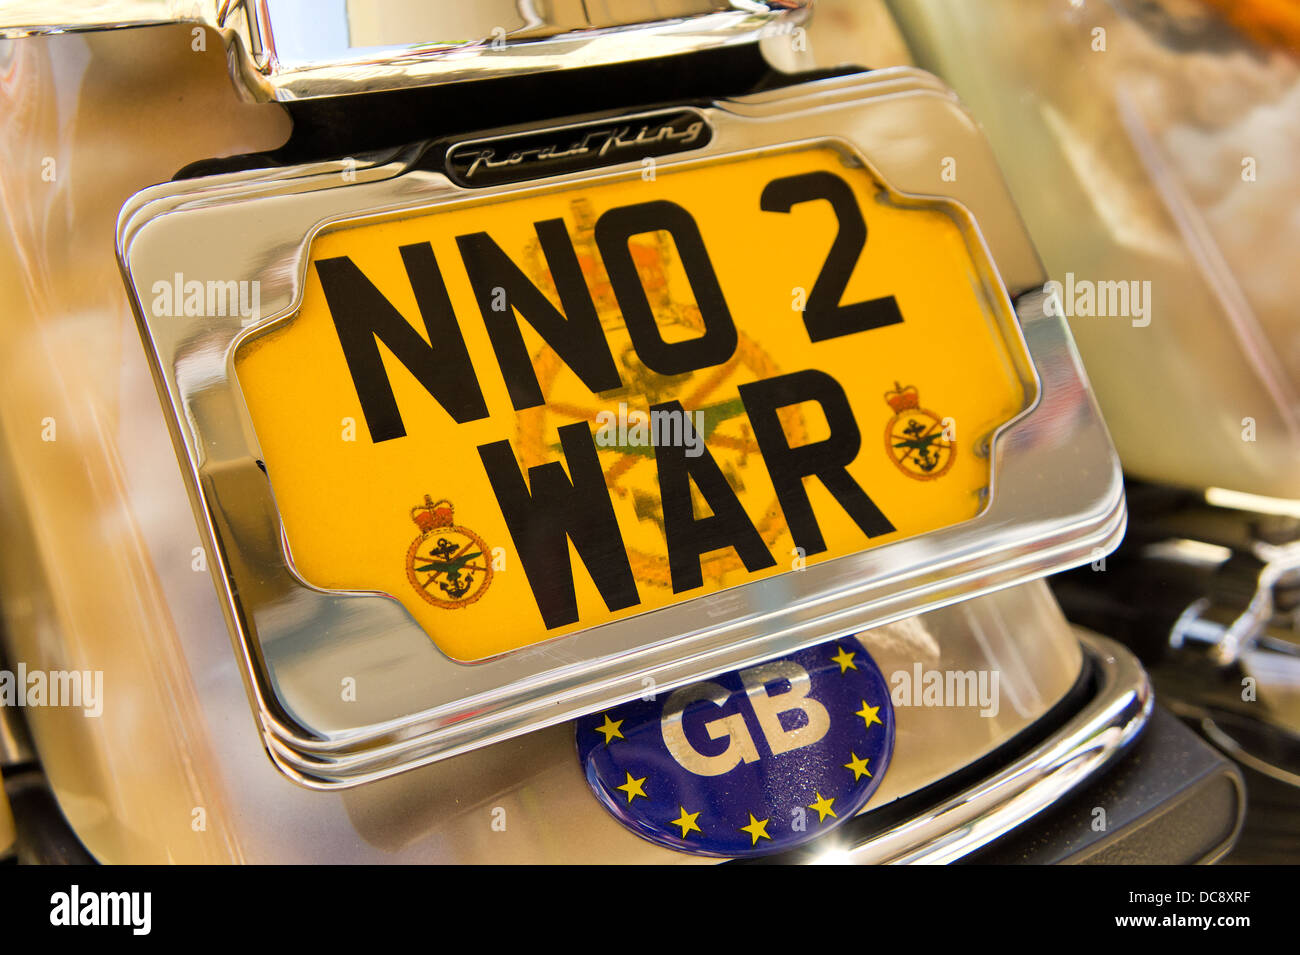 NNO 2 War Number Plate Stock Photo